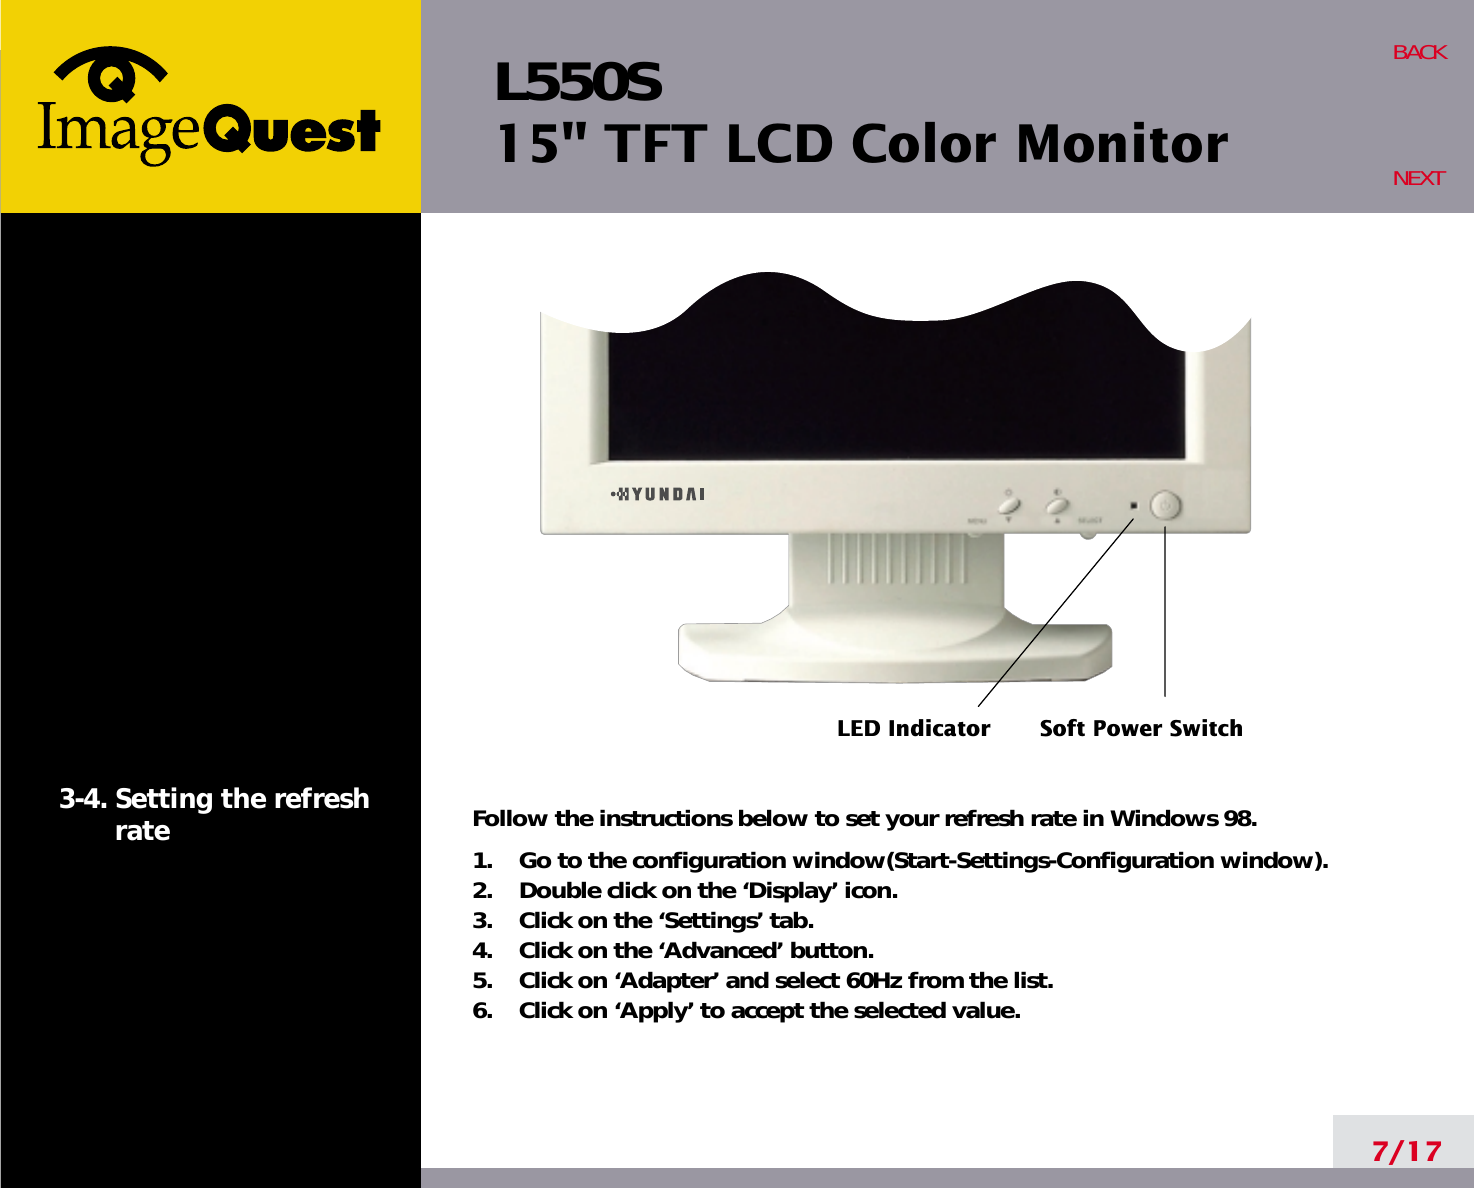 L550S15&quot; TFT LCD Color Monitor7/17BACKNEXT3-4. Setting the refreshrate Follow the instructions below to set your refresh rate in Windows 98.1.    Go to the configuration window(Start-Settings-Configuration window).2.    Double click on the ‘Display’ icon.3.    Click on the ‘Settings’ tab.4.    Click on the ‘Advanced’ button.5.    Click on ‘Adapter’ and select 60Hz from the list.6.    Click on ‘Apply’ to accept the selected value.LED Indicator Soft Power Switch